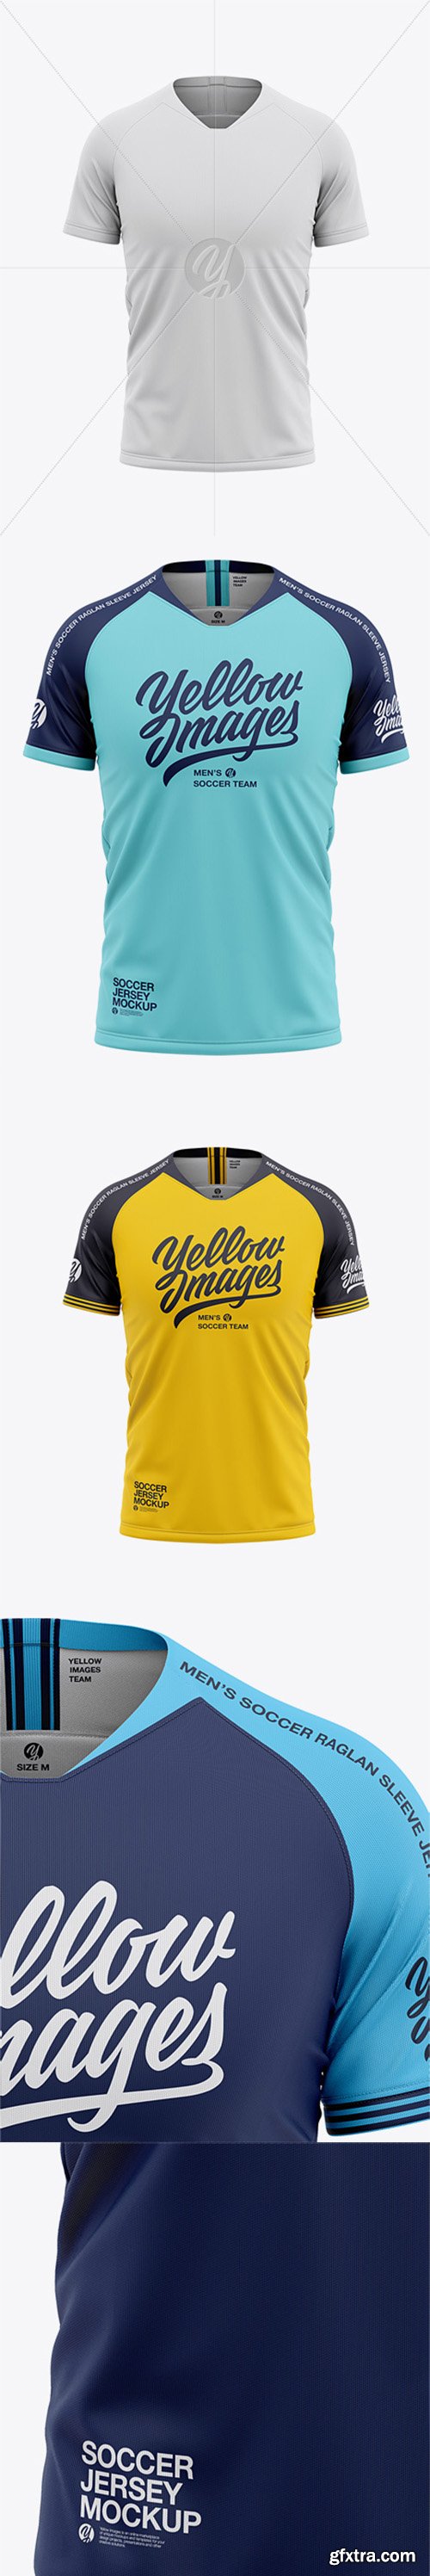 Men’s Soccer Jersey Mockup - Front View 43069